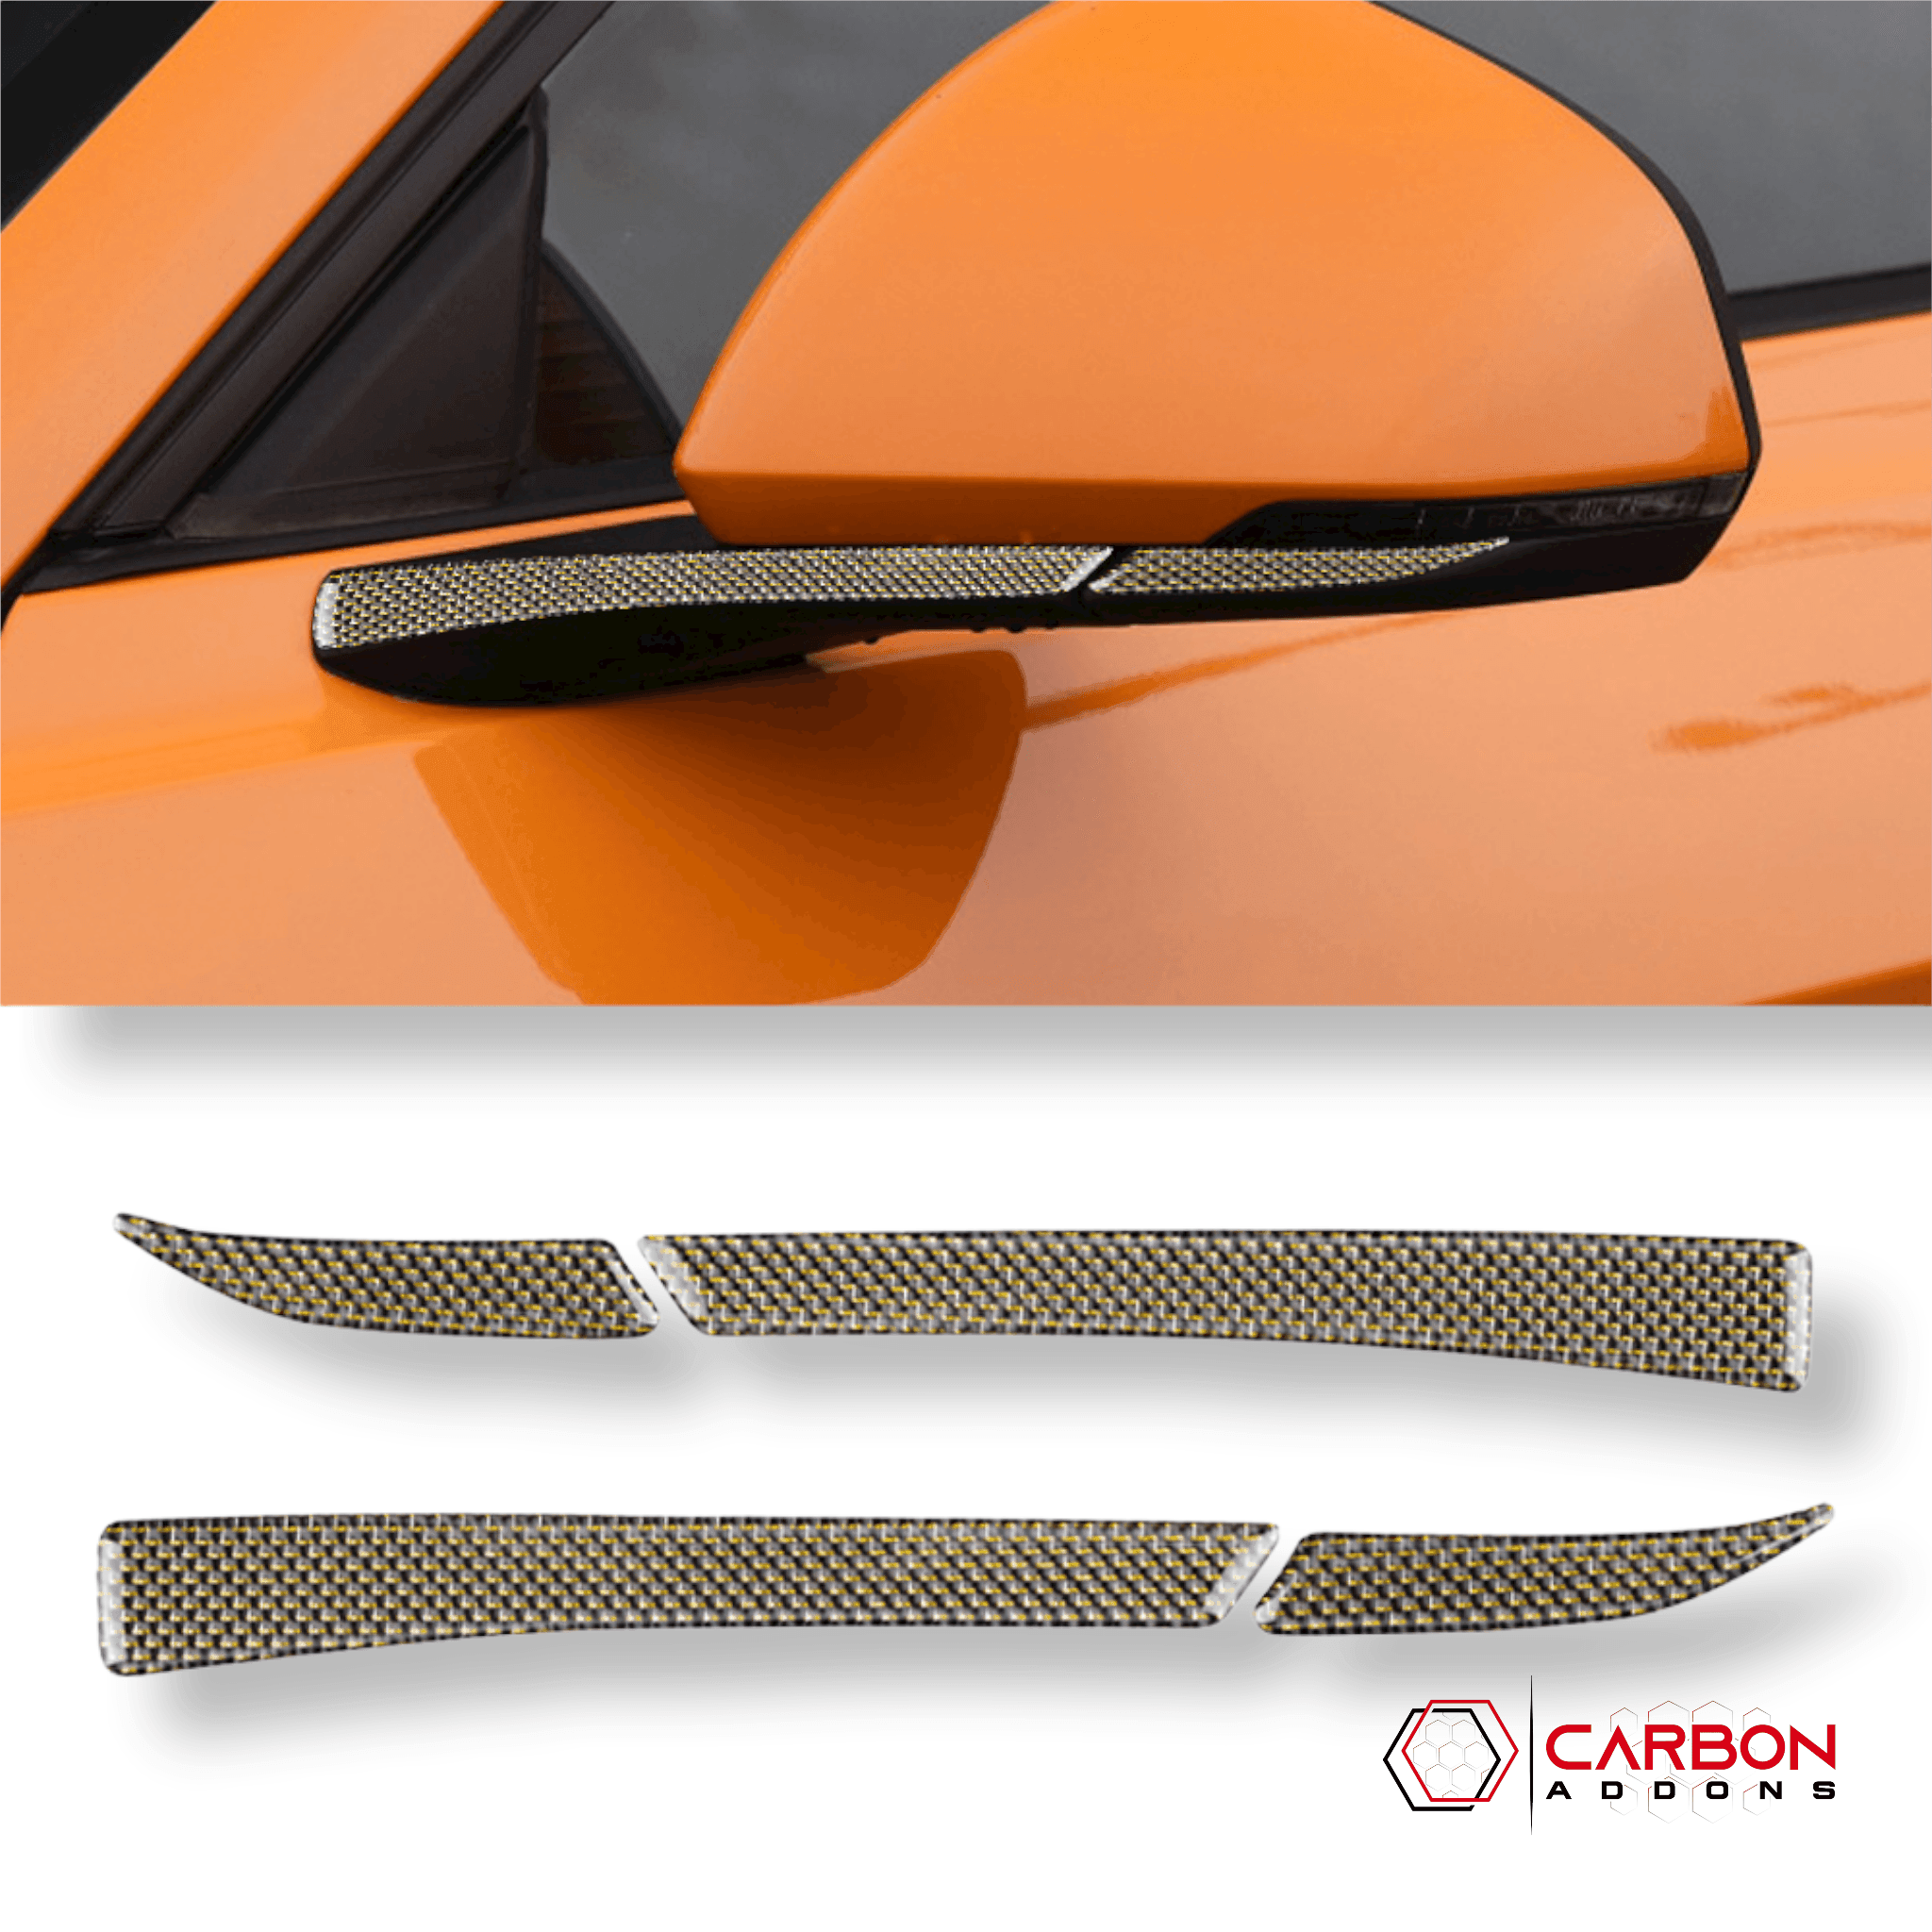 Reflective Carbon Fiber Rear View Mirror Trim Overlay For Ford